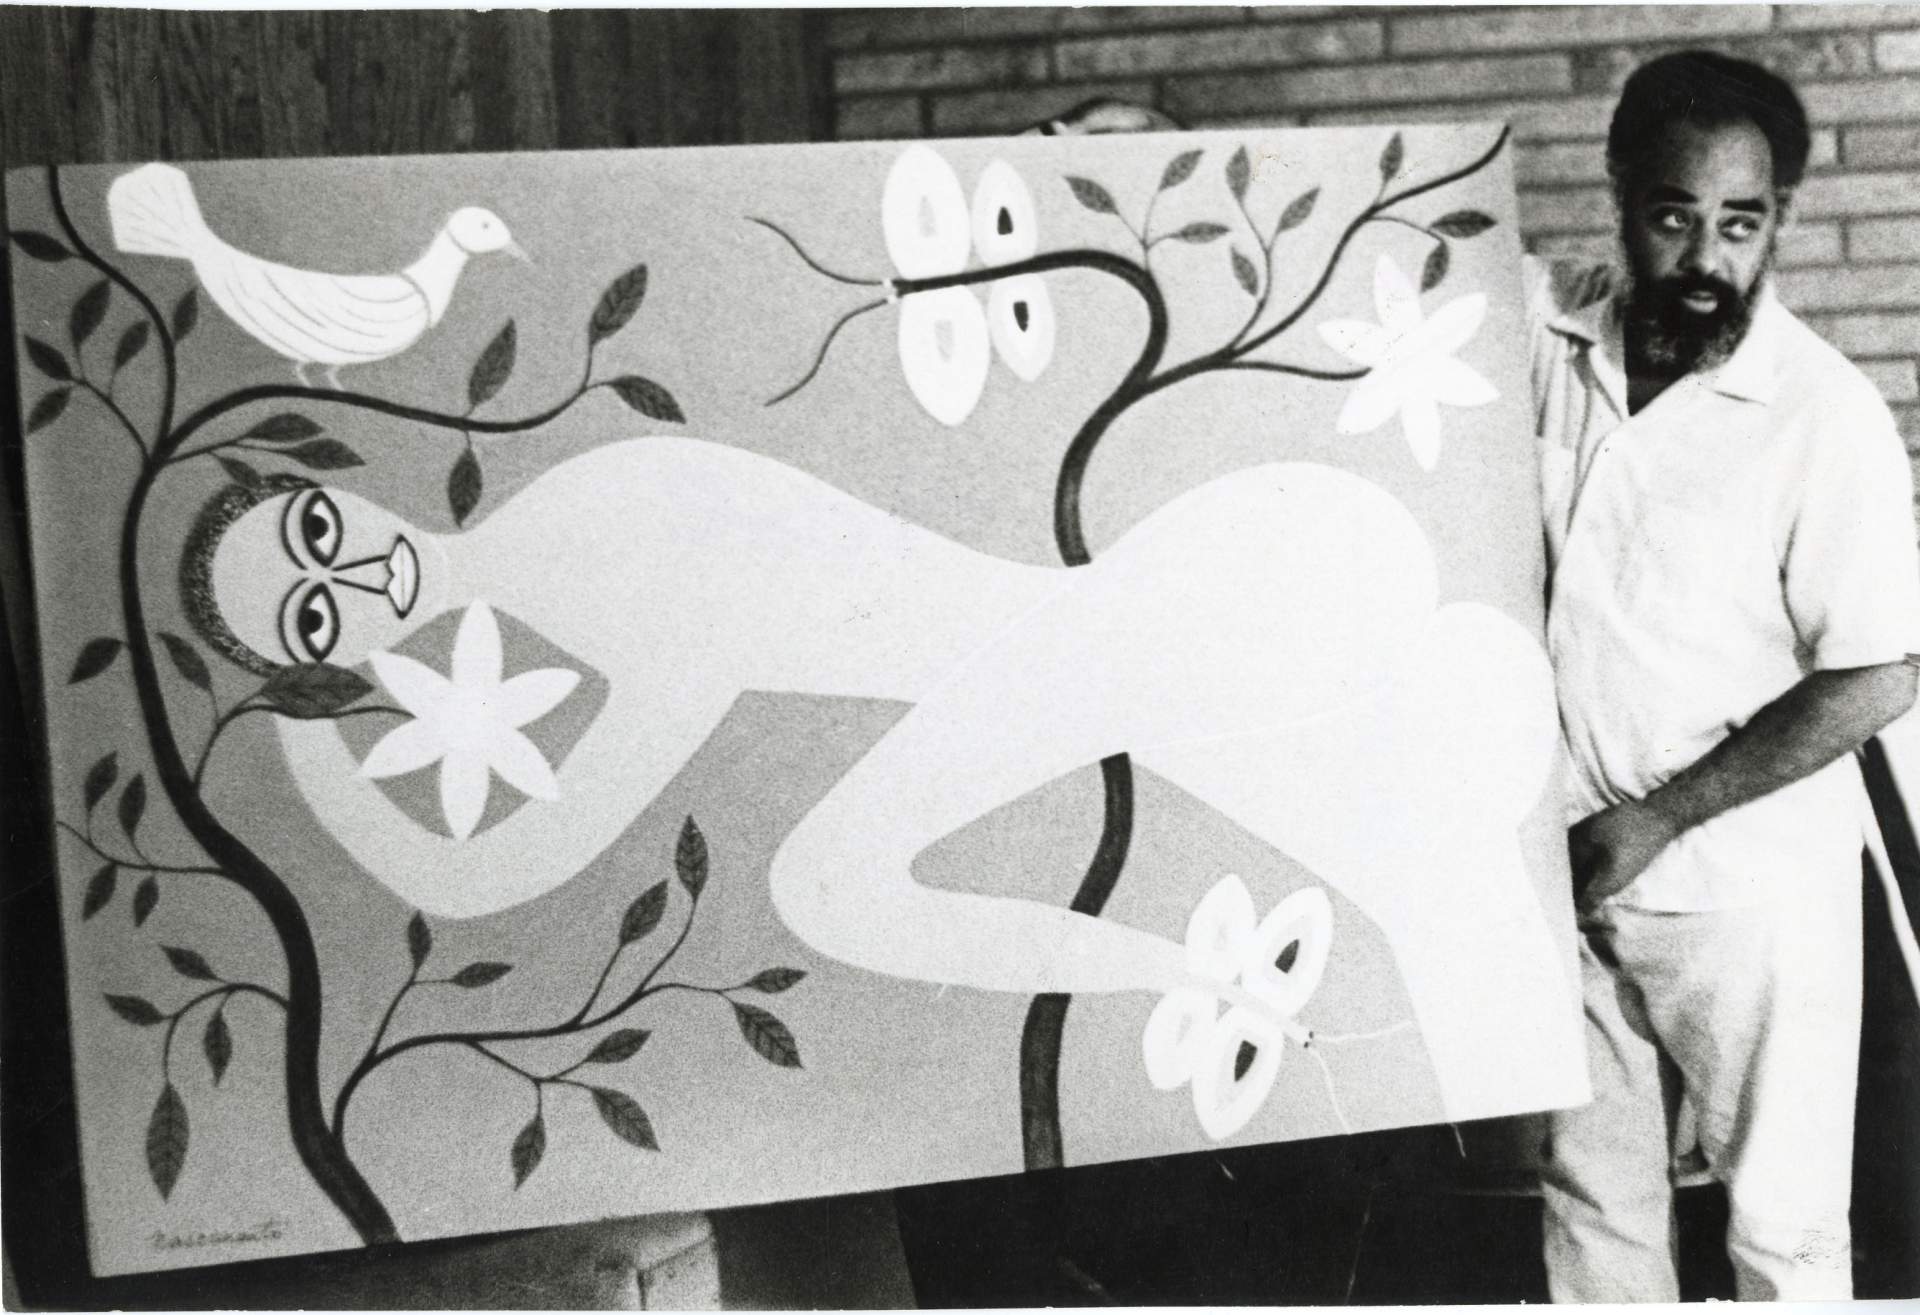 Undated Photo of Nascimento and one of his paintings